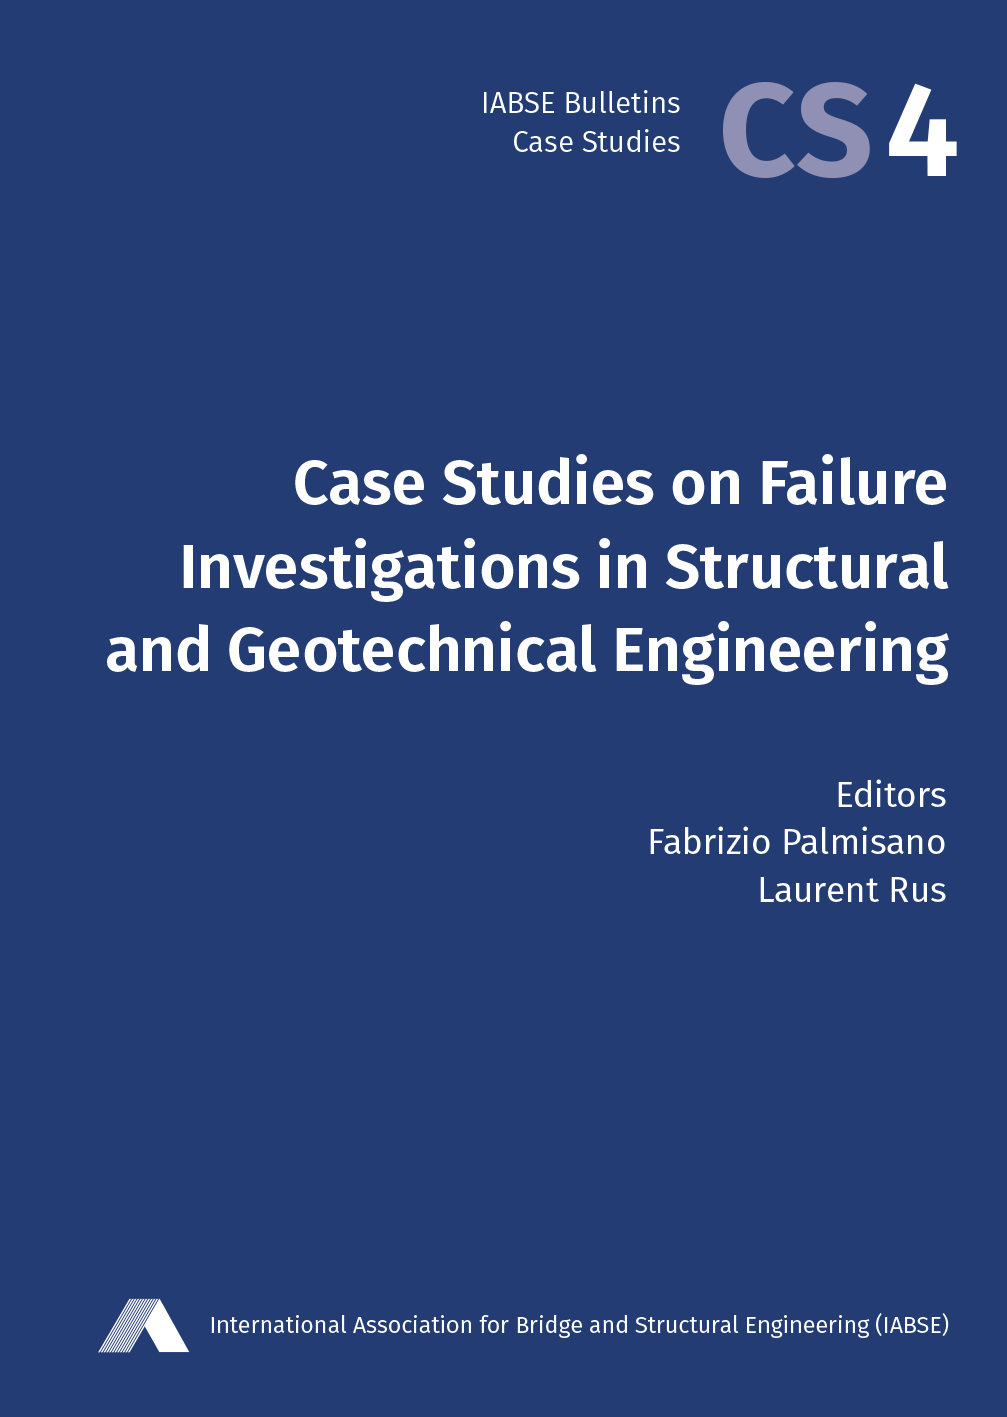  Case Studies on Failure Investigations in Structural and Geotechnical Engineering